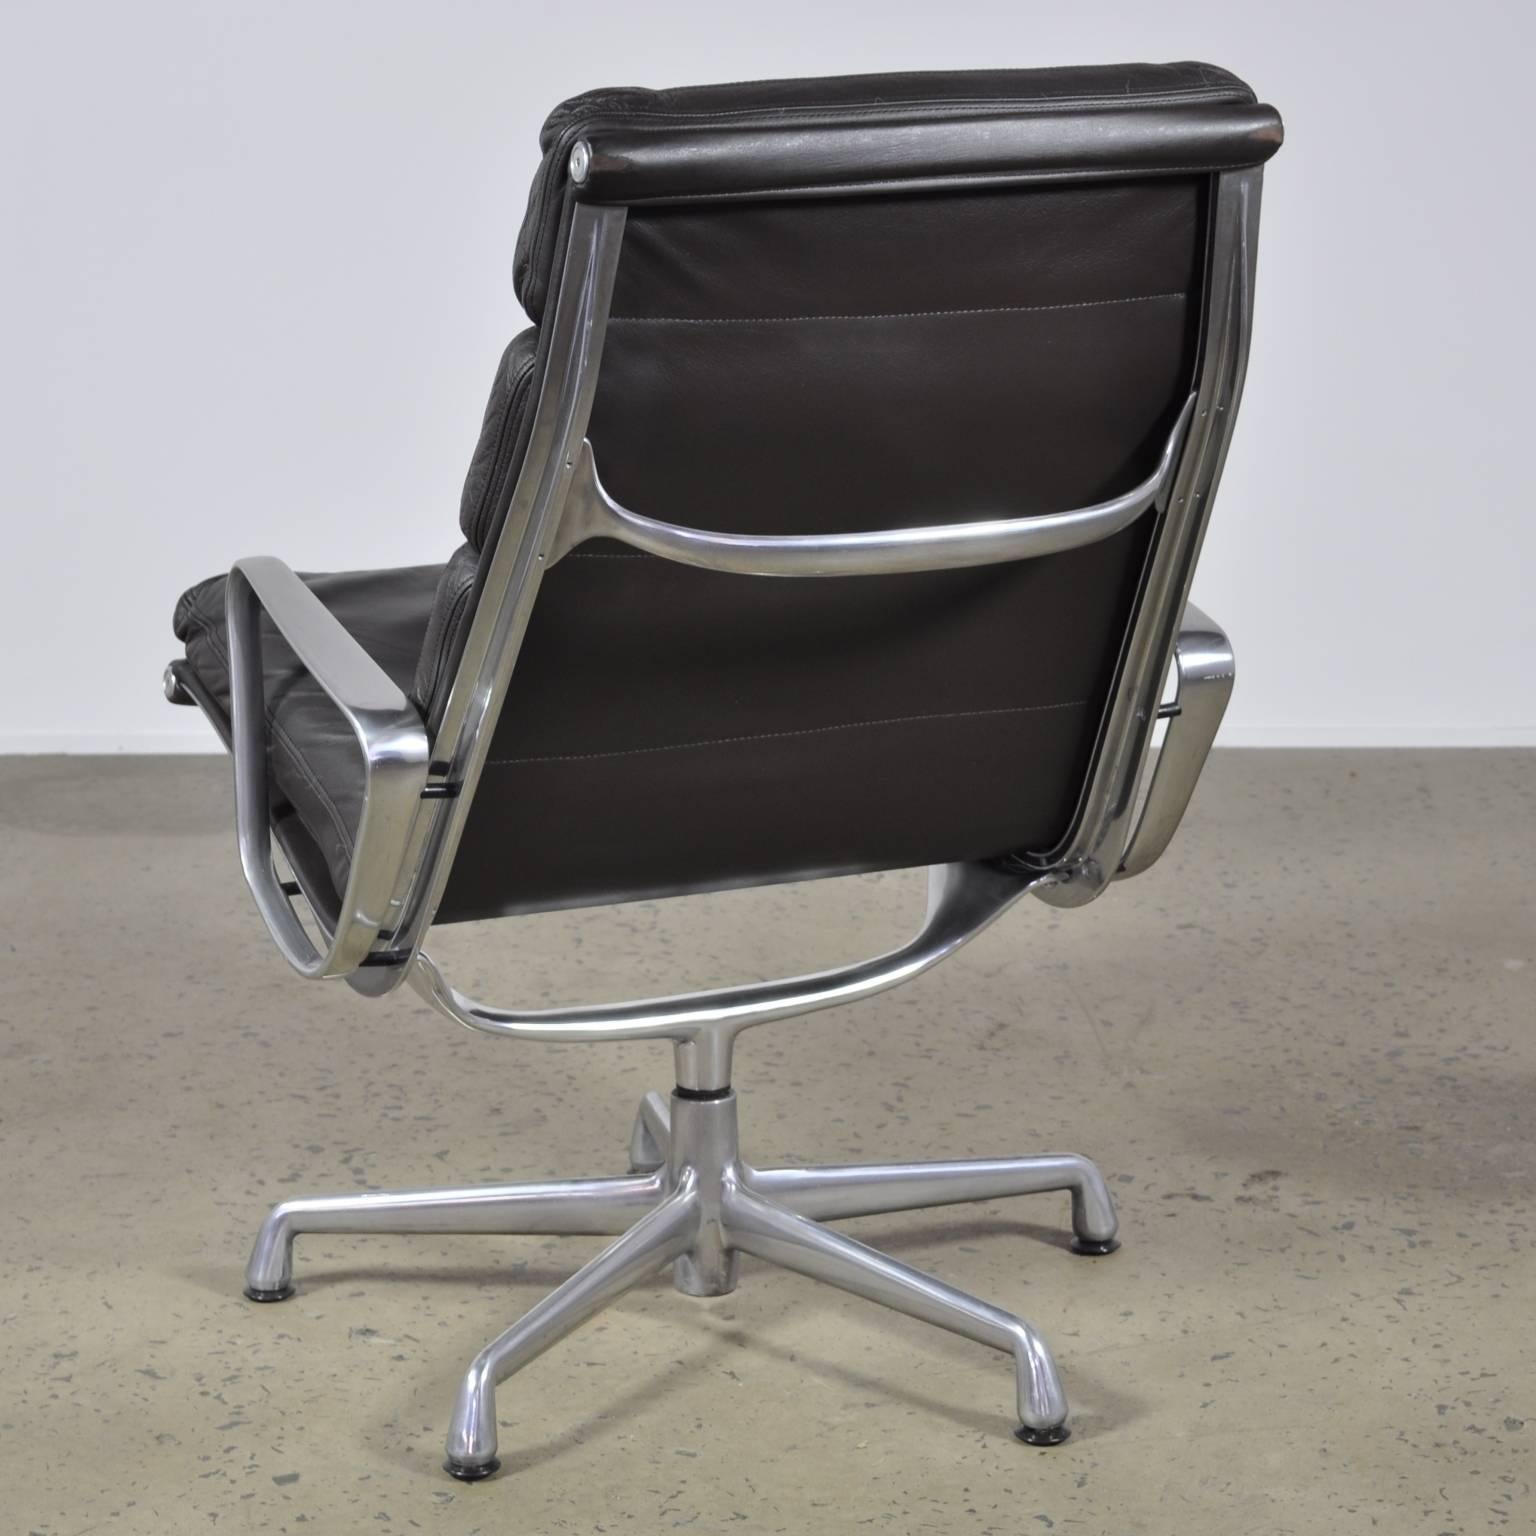 The clean, contemporary Silhouette of this iconic soft pad lounge/desk chair for Herman Miller is a perfect example of Charles & Ray Eames clean sophisticated designs. Our example is complete with a rare five-star base, three (high back) padded